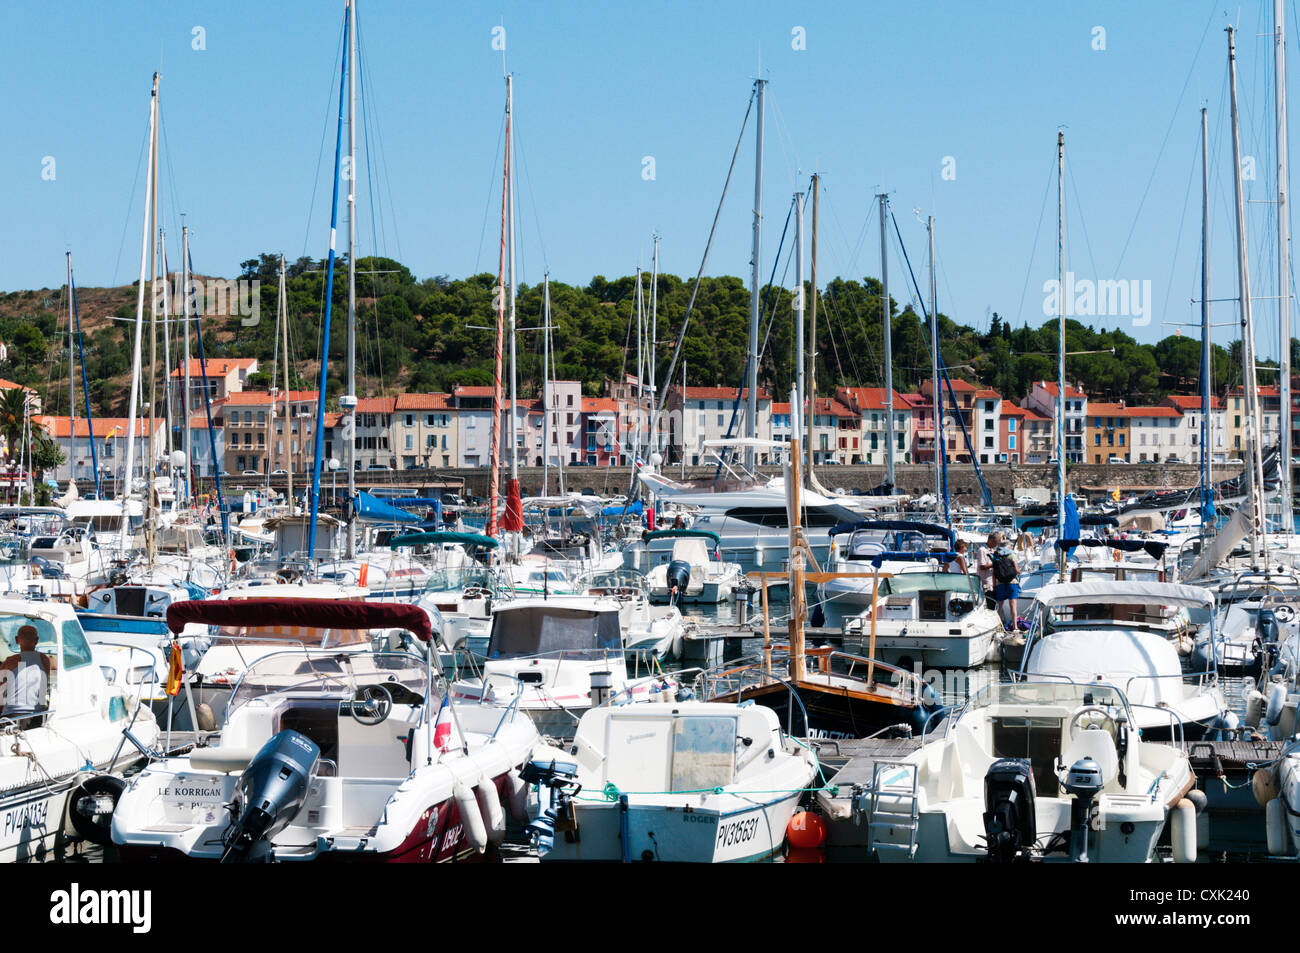 Boats crowded in the harbour of the small French town of Port Vendres close to the border with Spain. Stock Photo